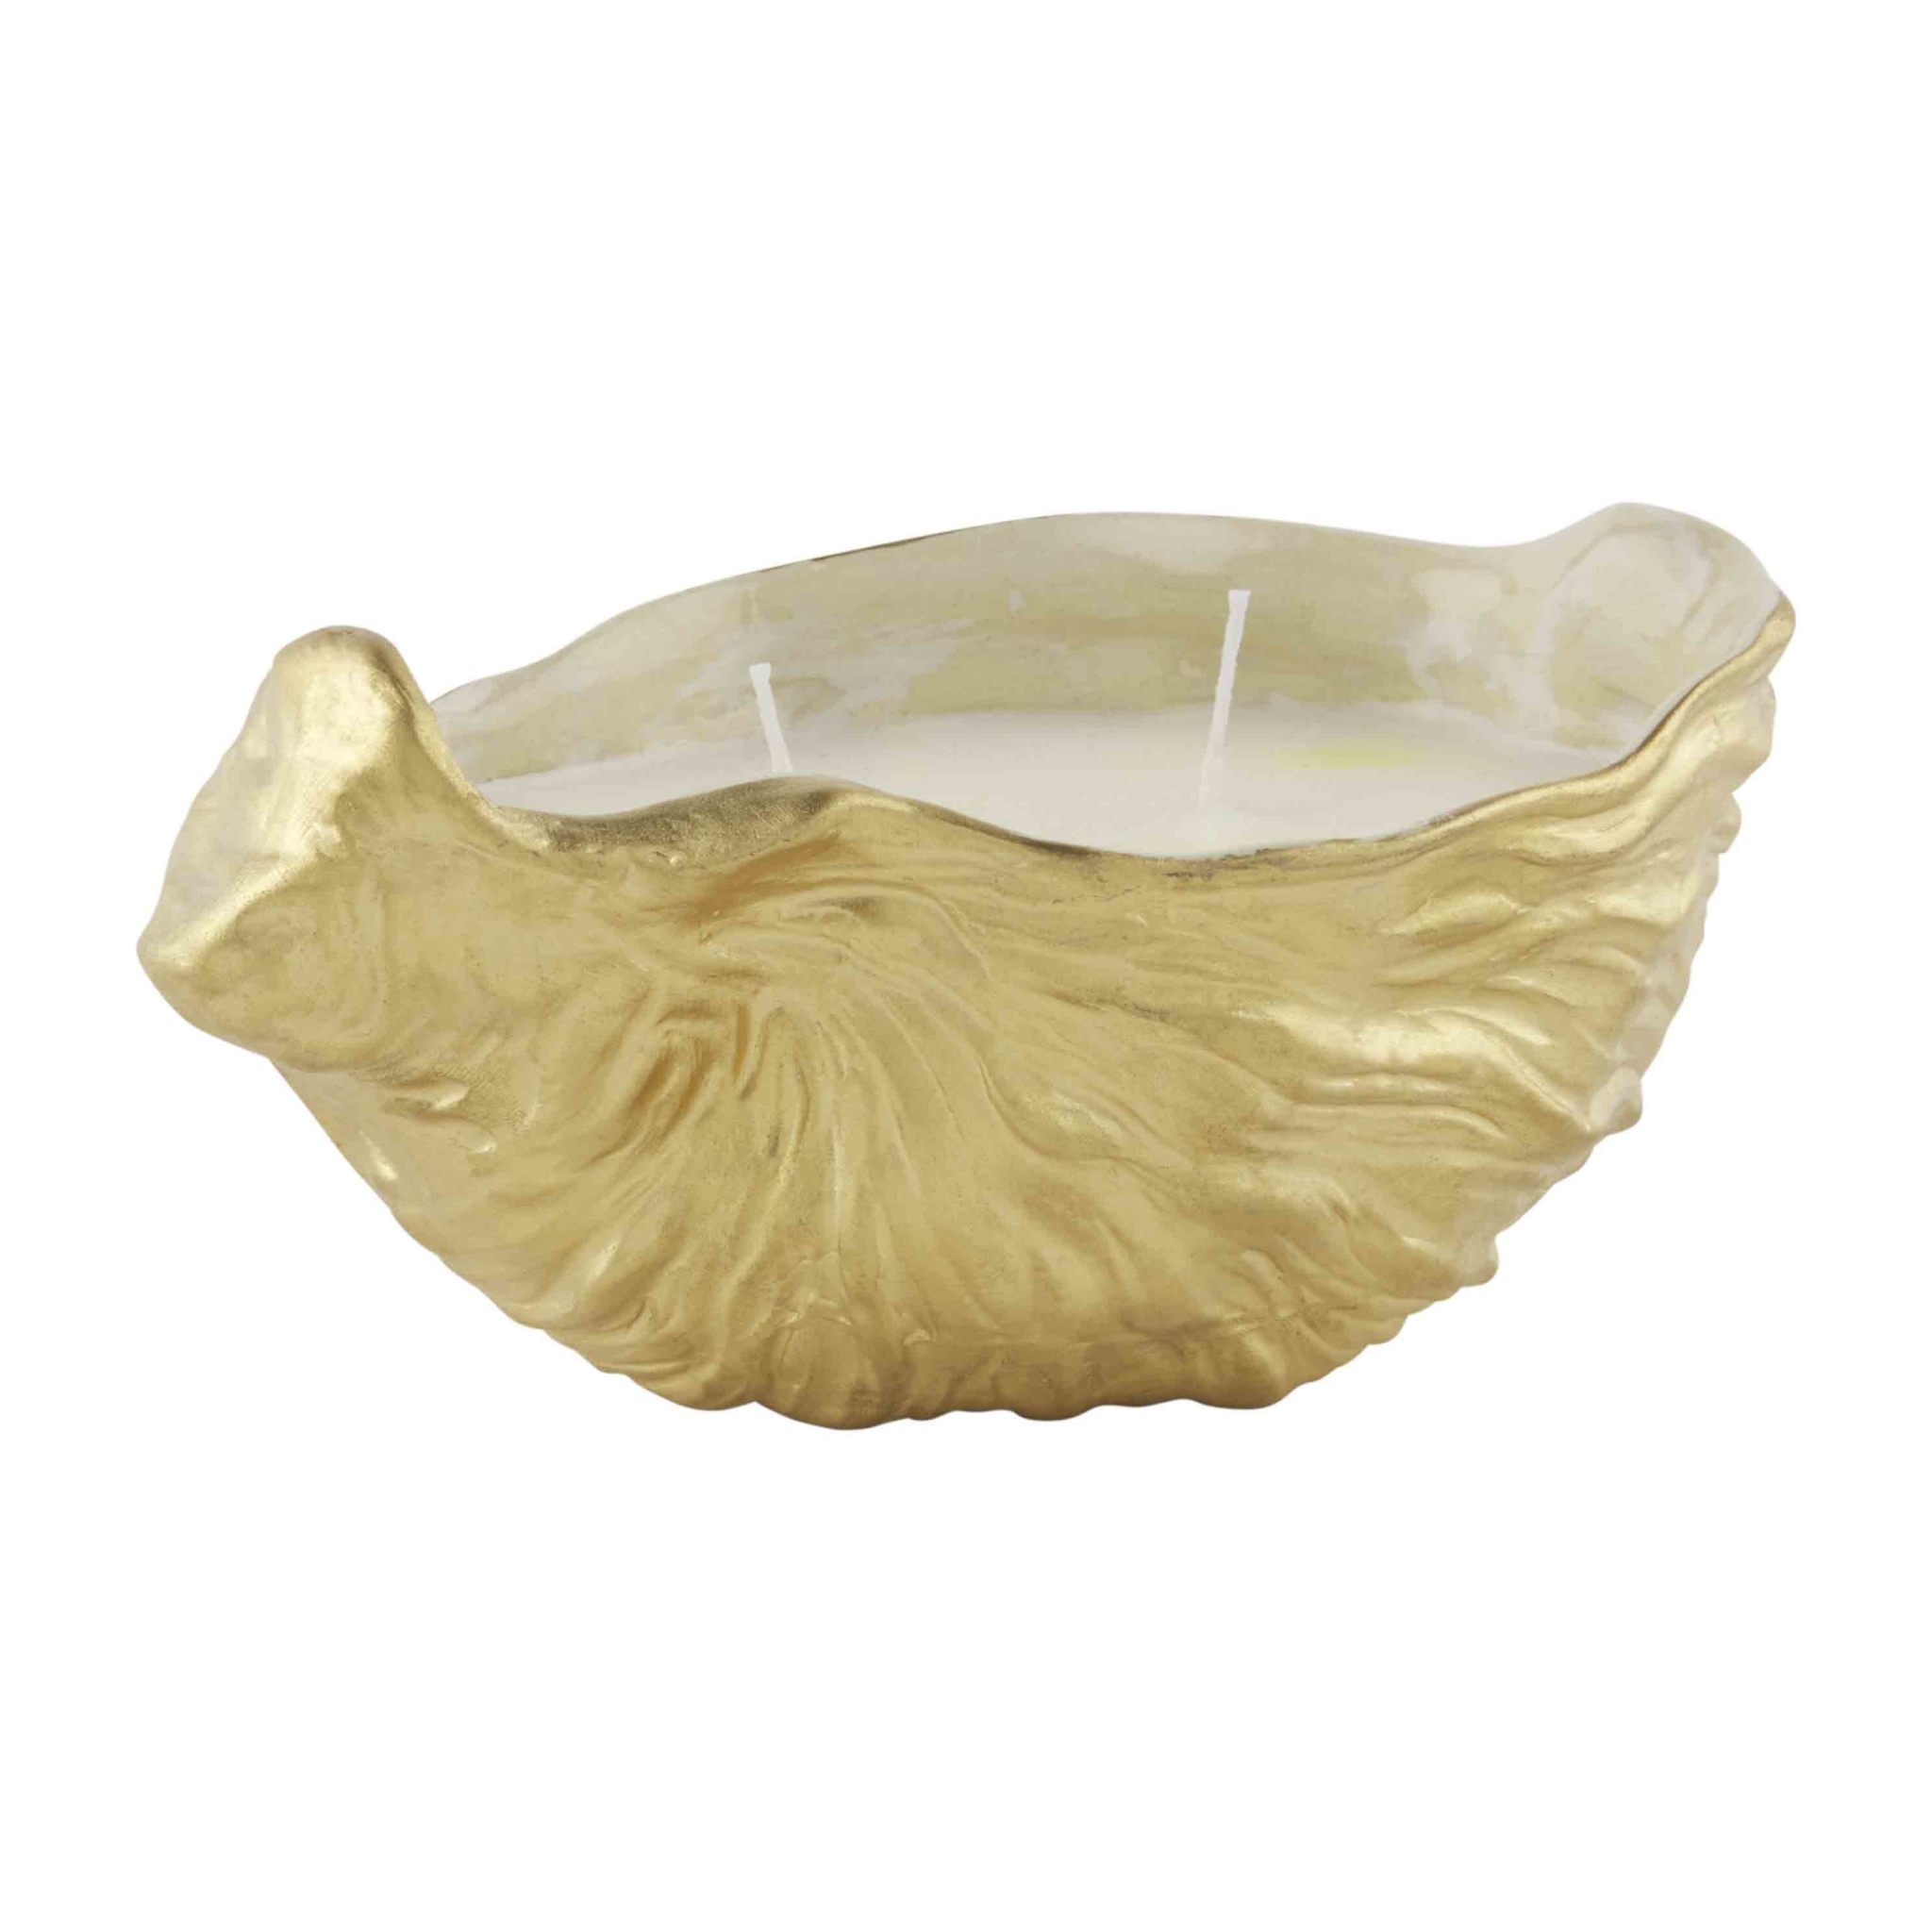 Mud Pie GOLD OYSTER CANDLE